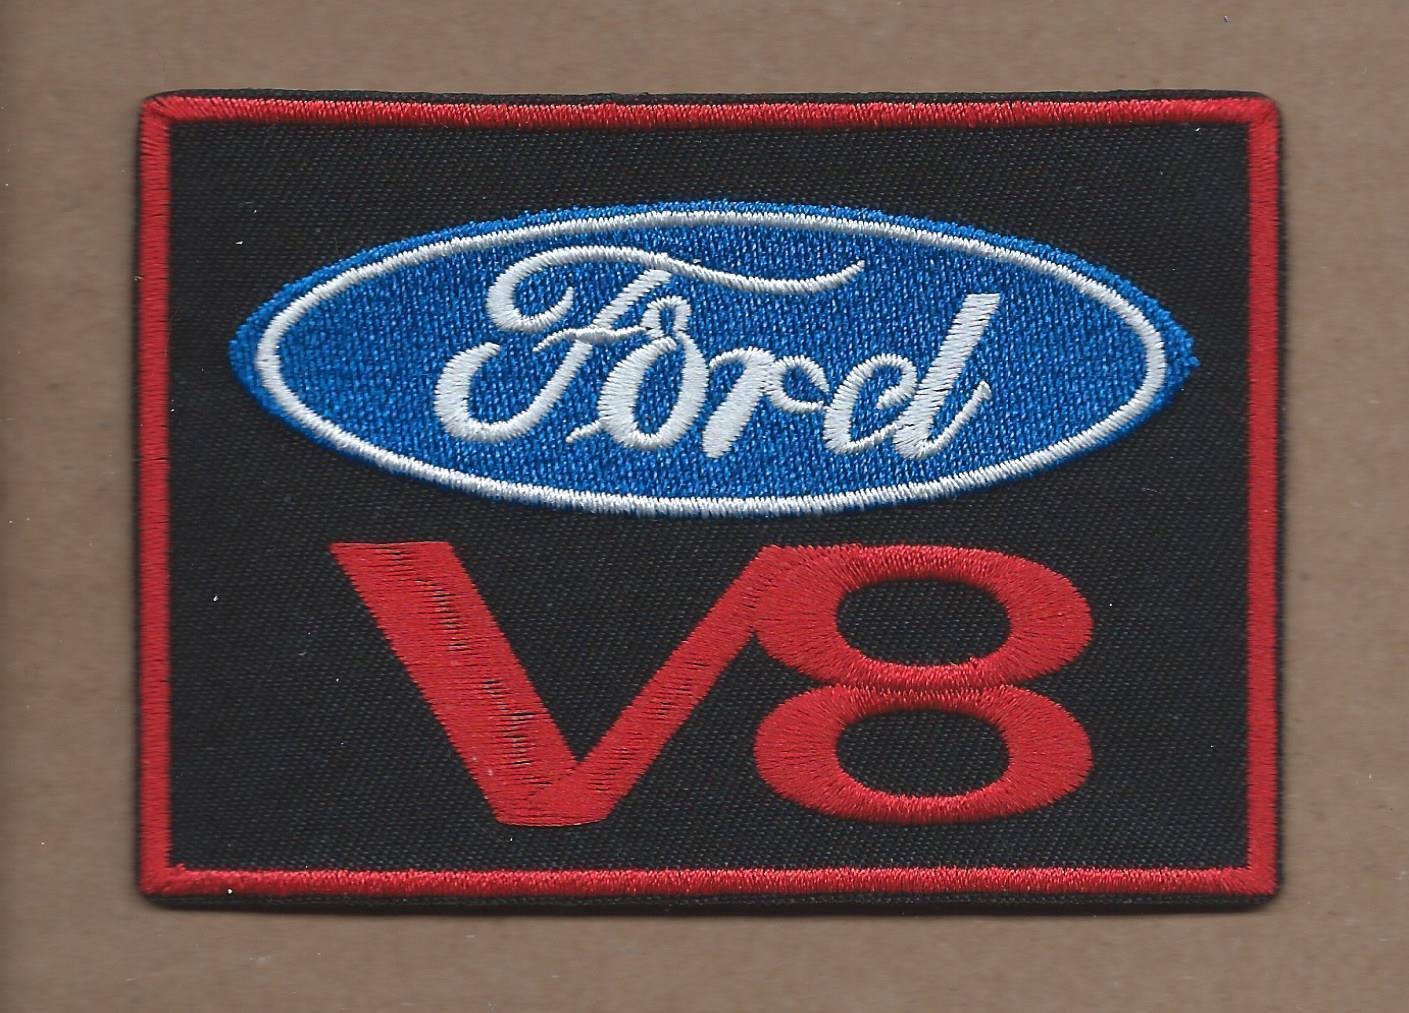 NEW 2 3/4 X 3 3/4 INCH FORD V8 IRON ON PATCH 